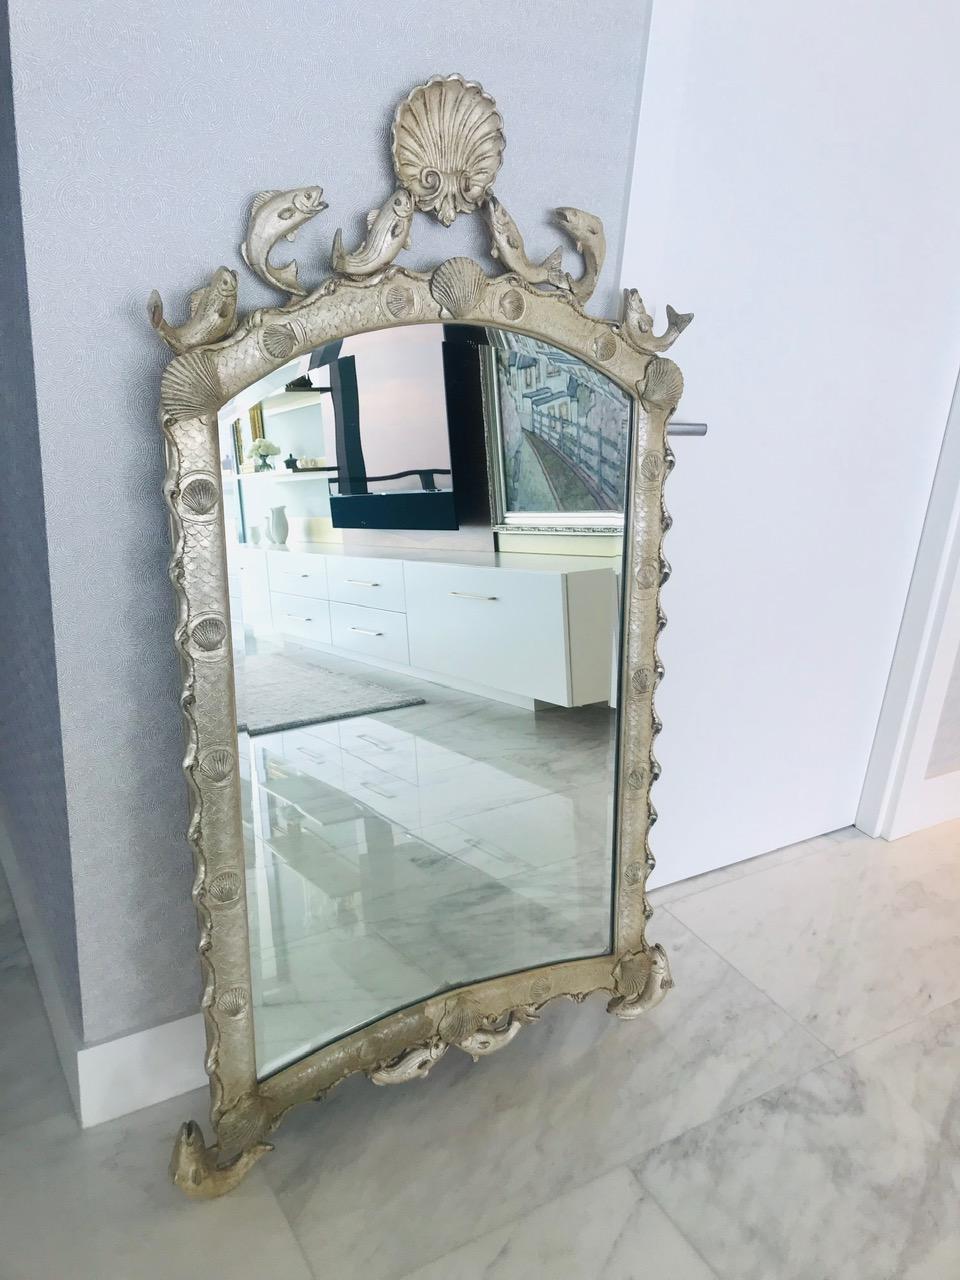 Stunning Venetian style scalloped mirror with ocean sea life theme. The mirror features an arched frame with scalloped borders and with hand laid sterling silver leaf finish. Handmade by artisans using casting technique of wood, resin, and wire to